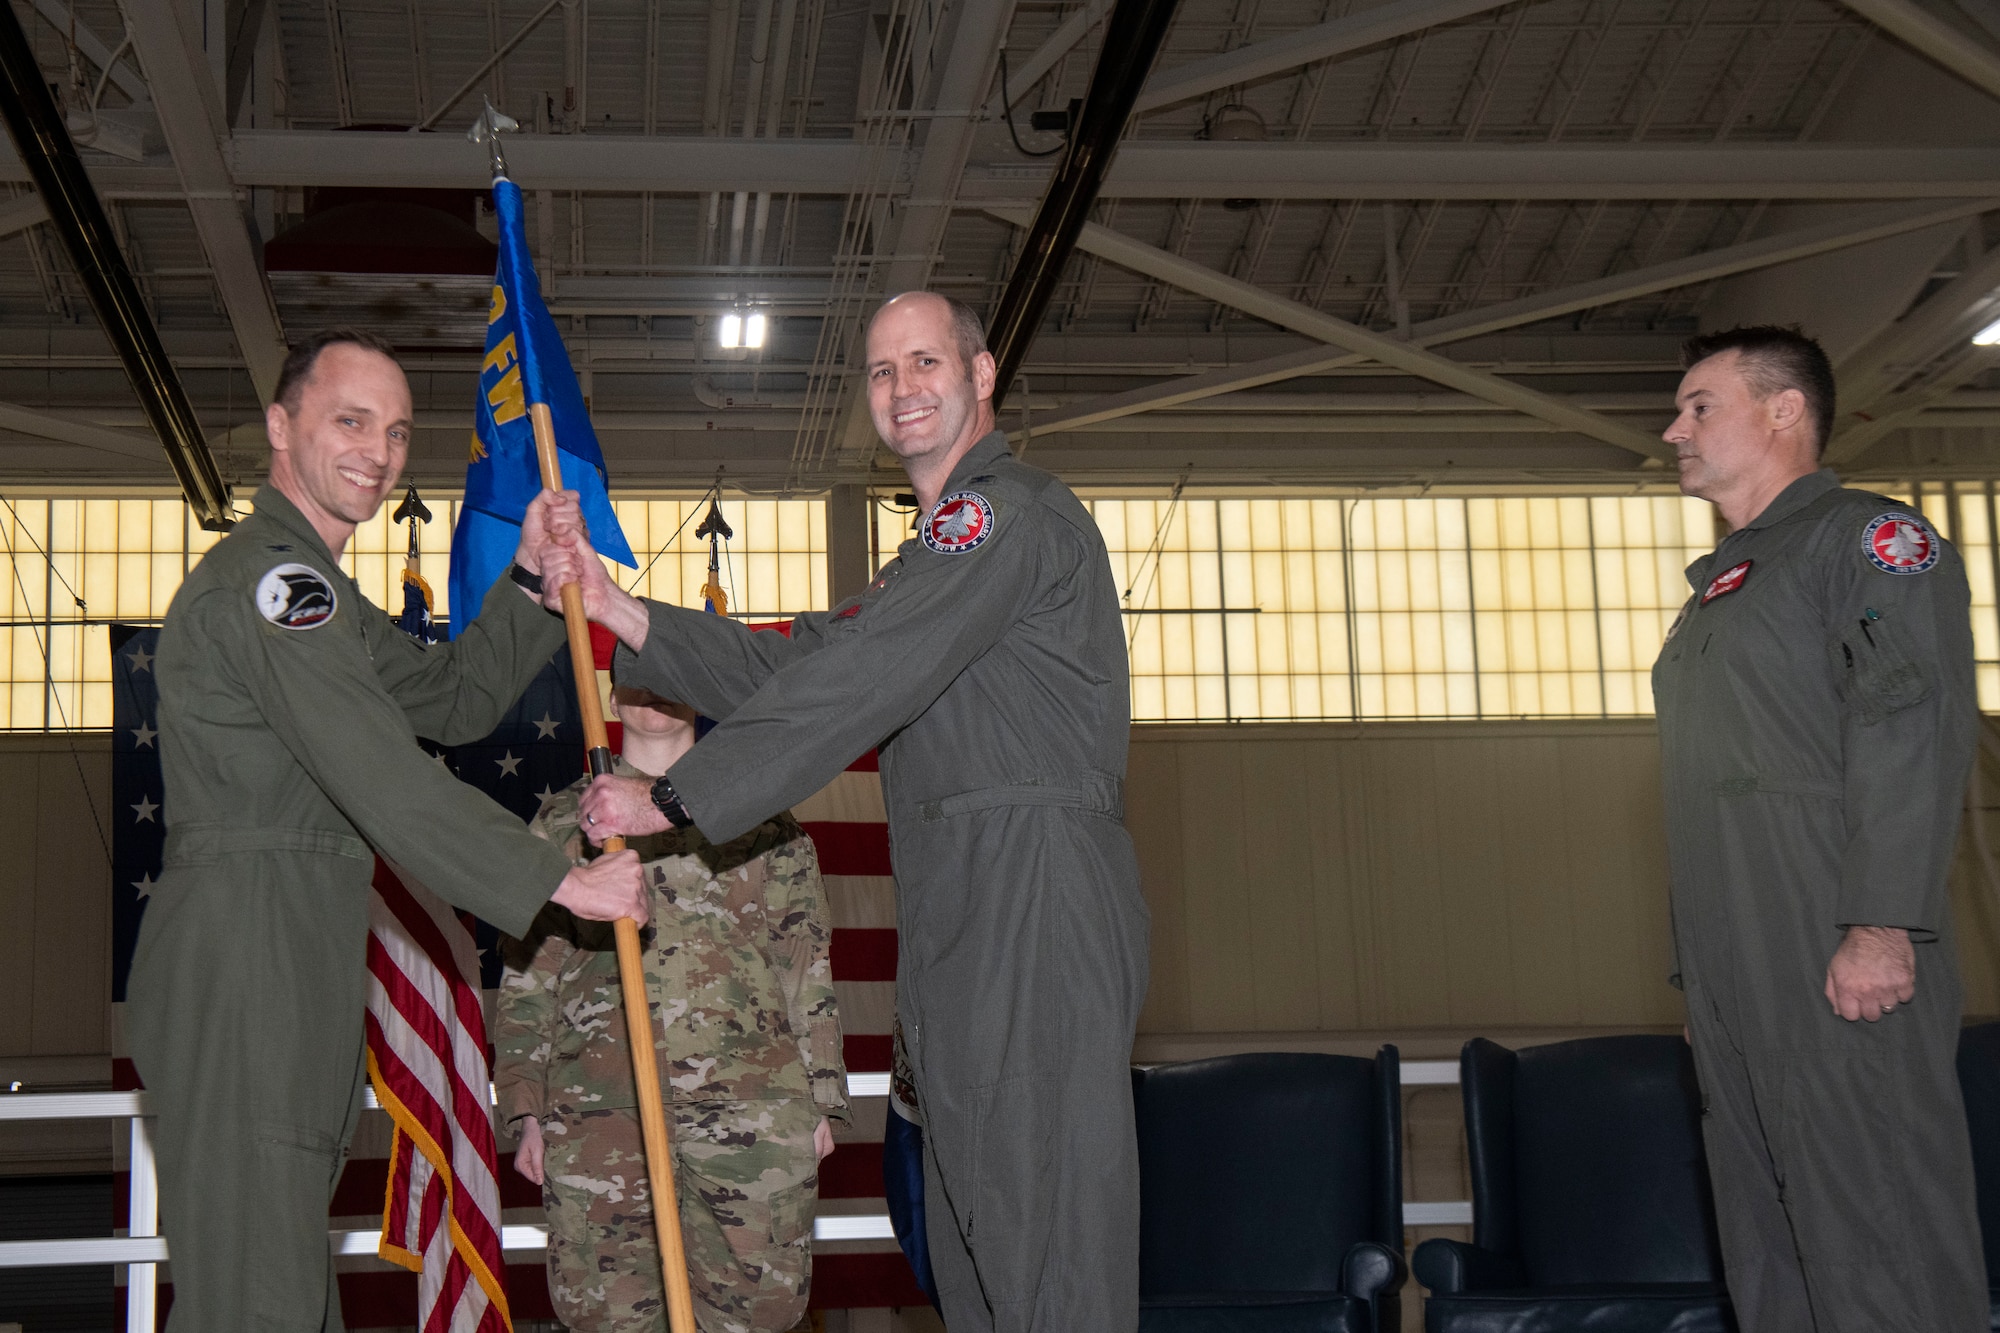 3 Air Force officers standing on stage, 2 holding a guidon